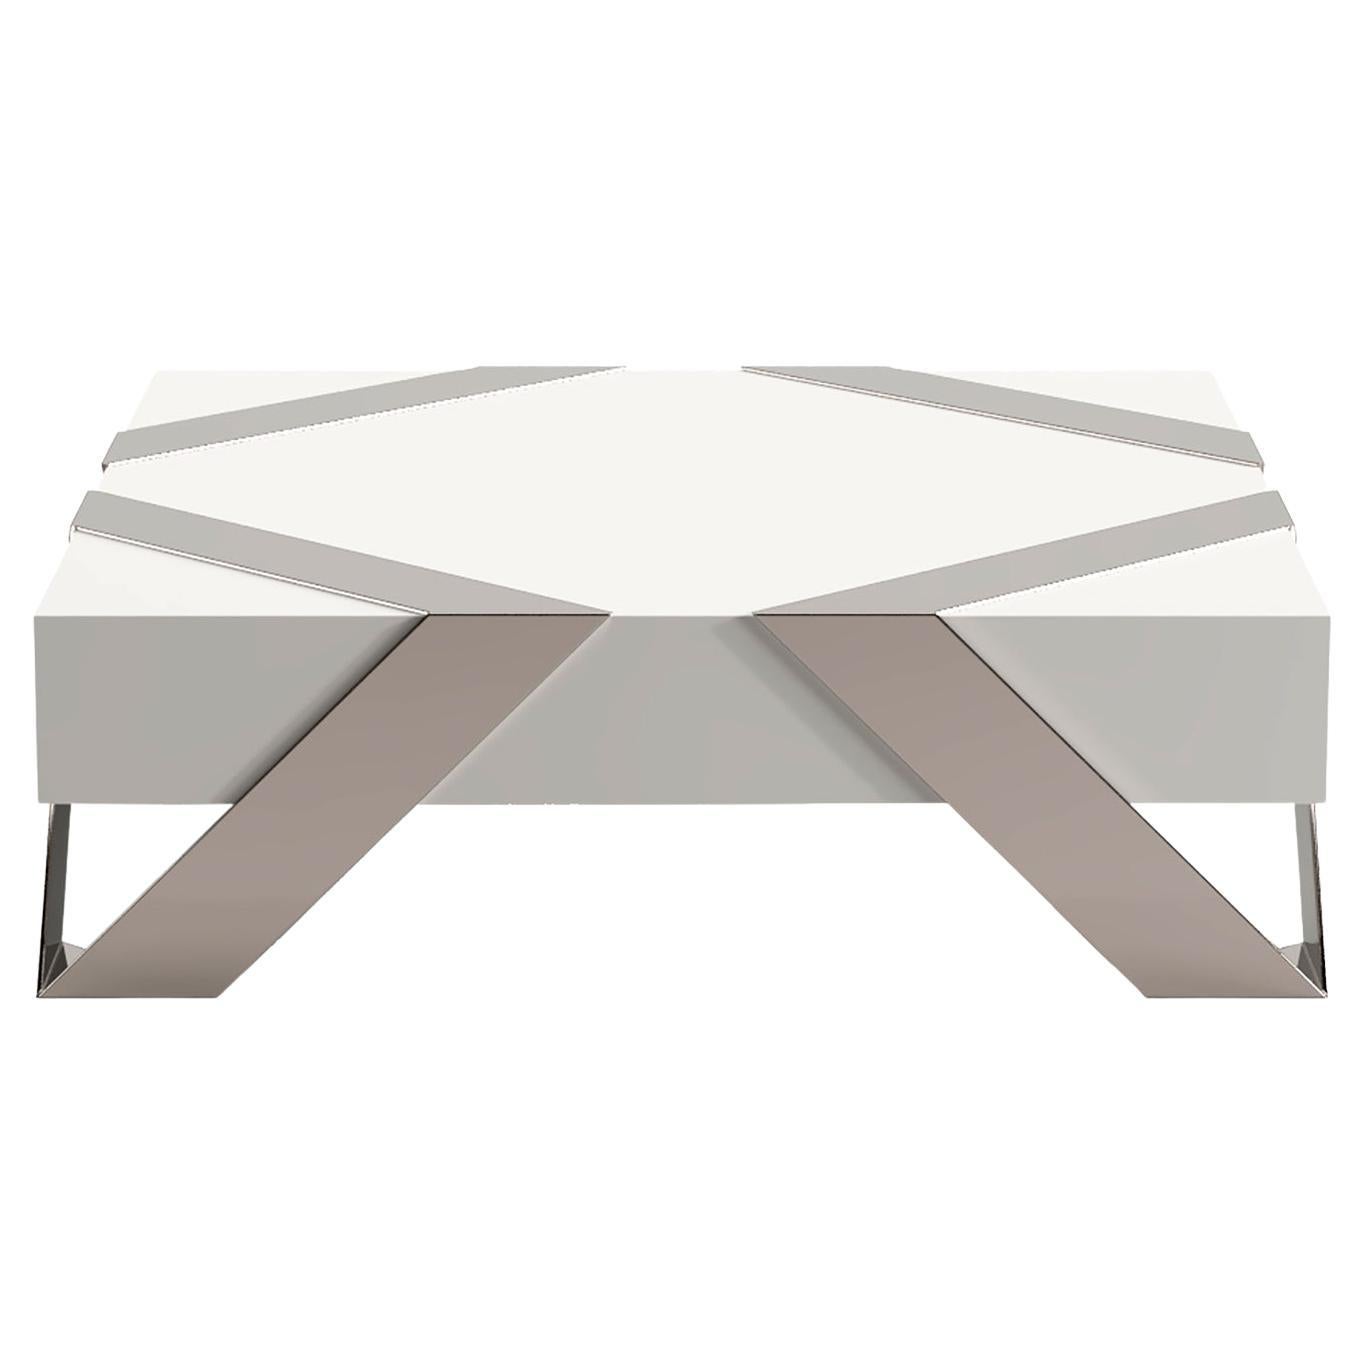 21st Century Modern Center Coffee Table White Lacquer & Brushed Stainless Steel